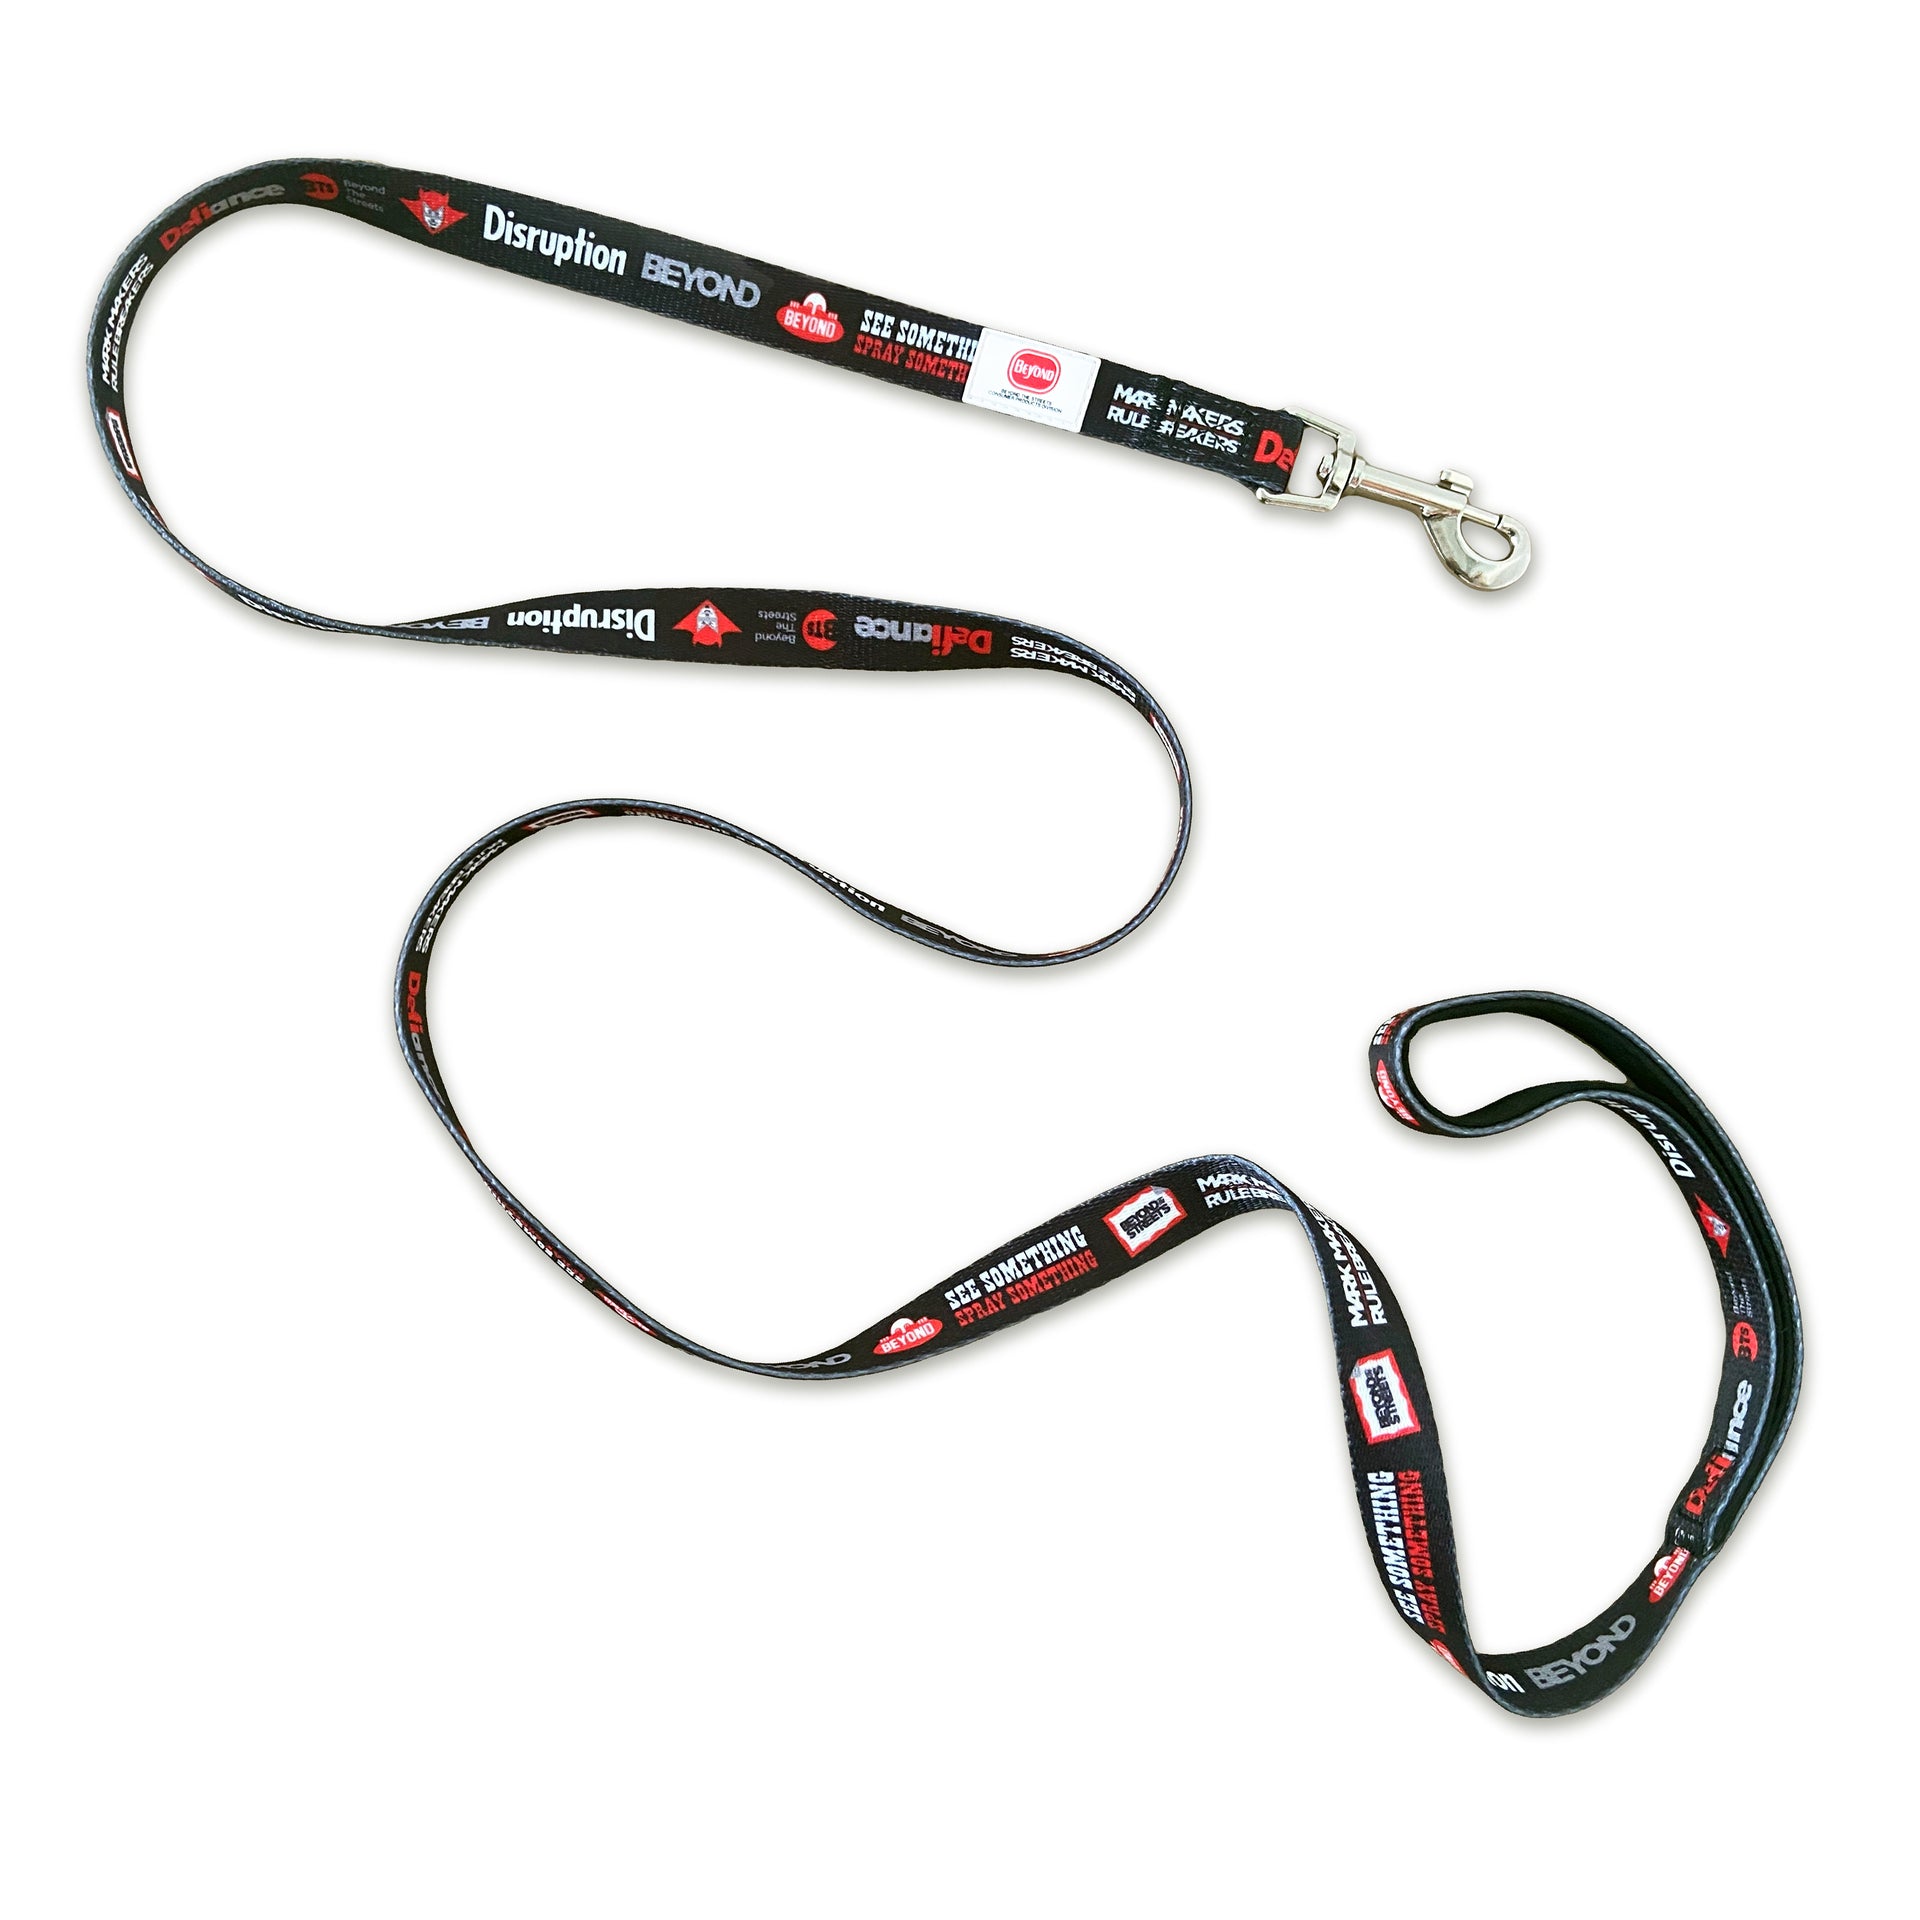 BEYOND THE STREETS "Series 1" Pet Leash